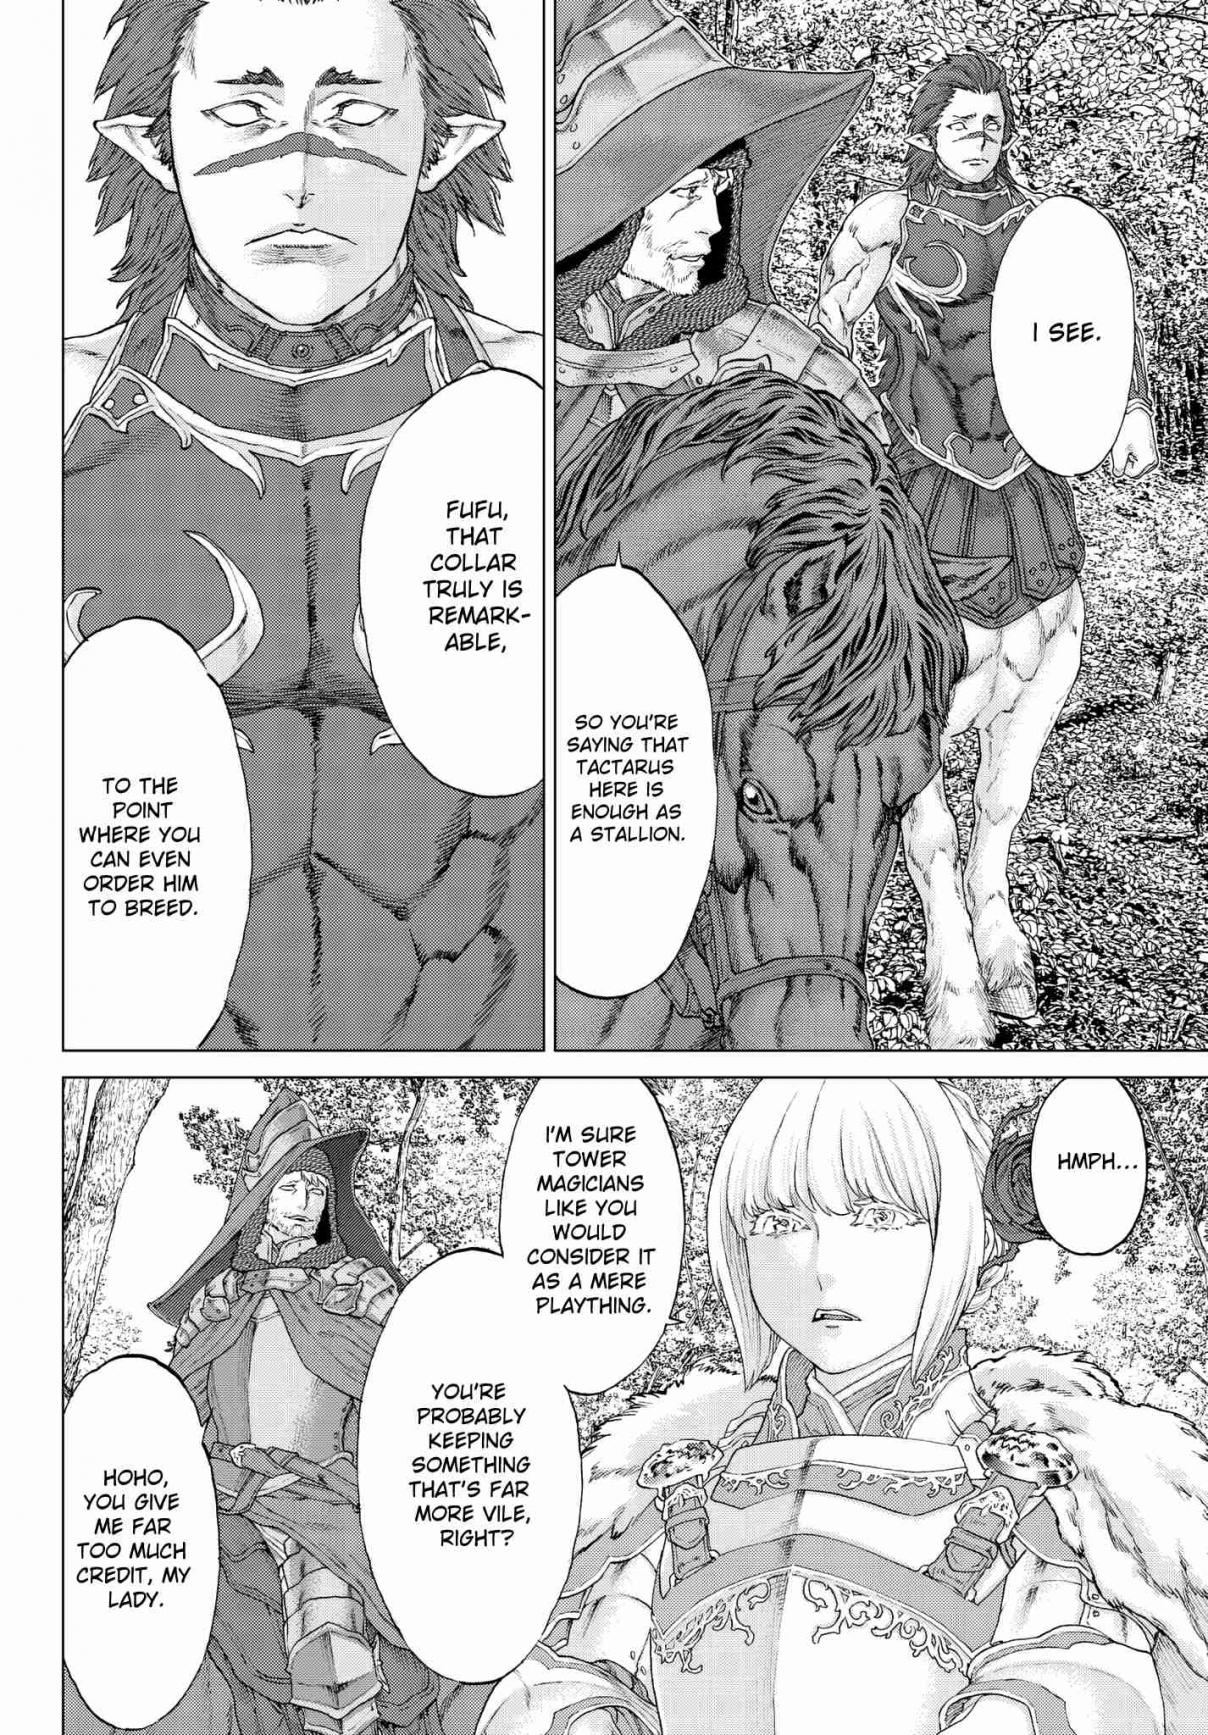 The Ride On King Vol. 2 Ch. 9 The President And The Demented Princess' Knights